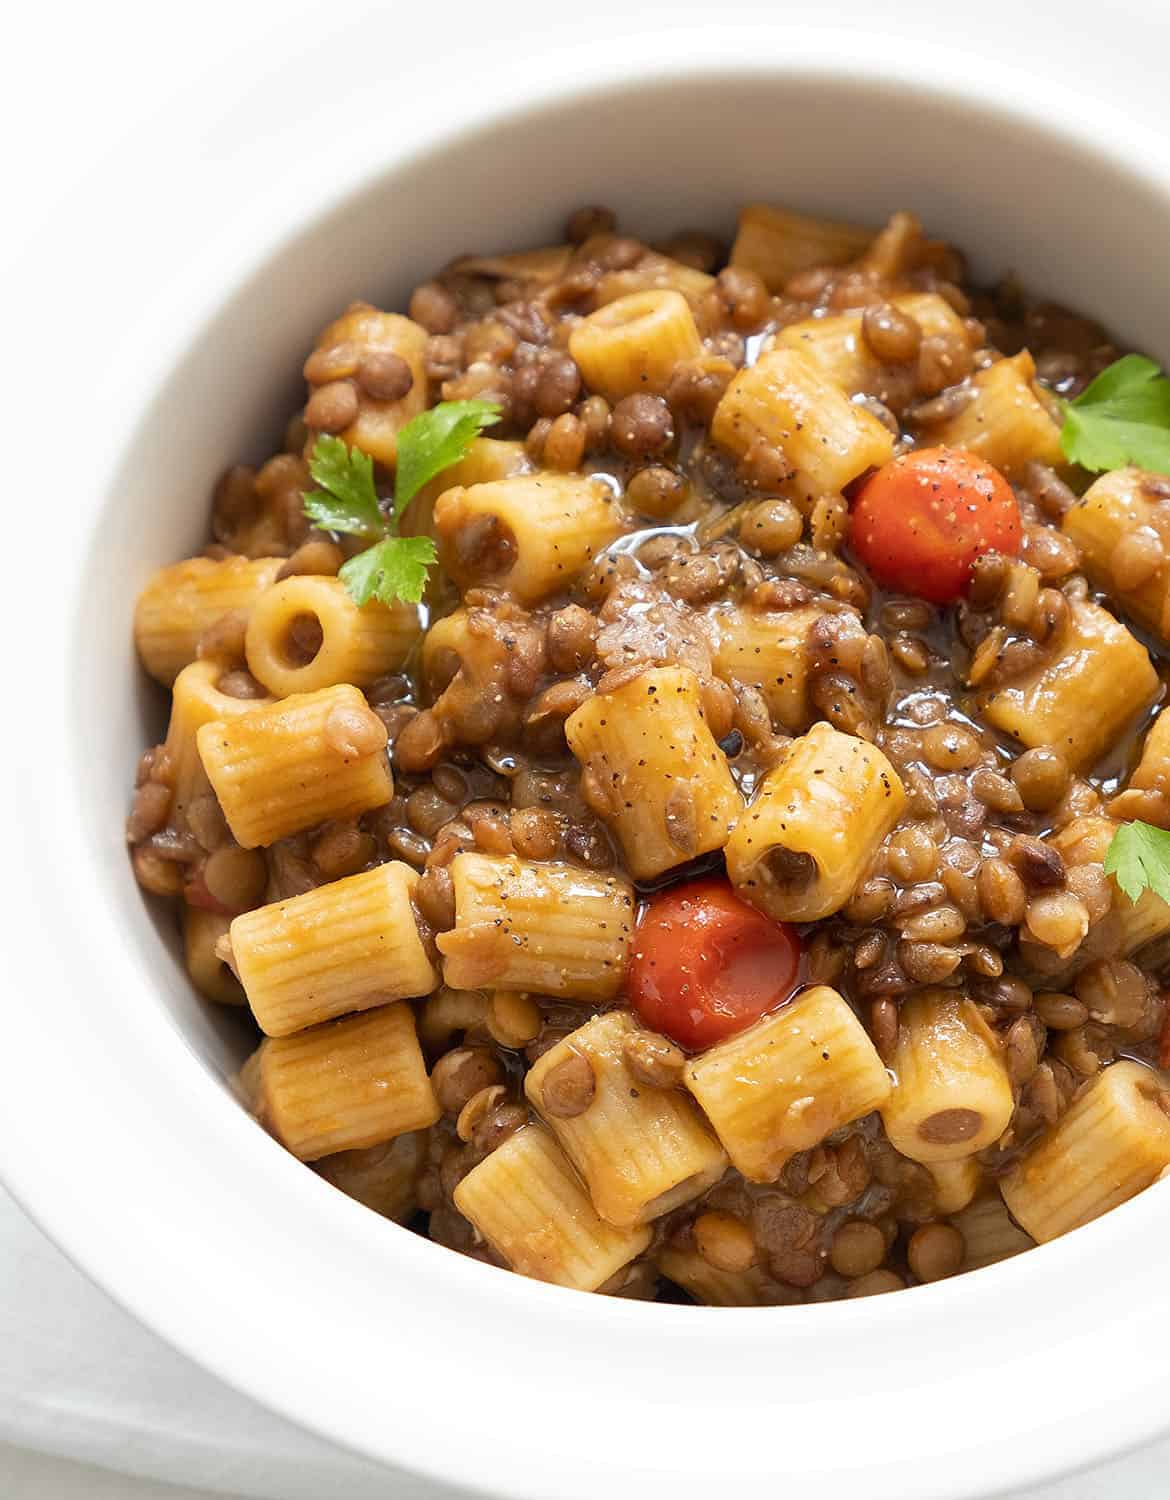 Vegan ditalini pasta and lentils in a white bowl - The Clever Meal